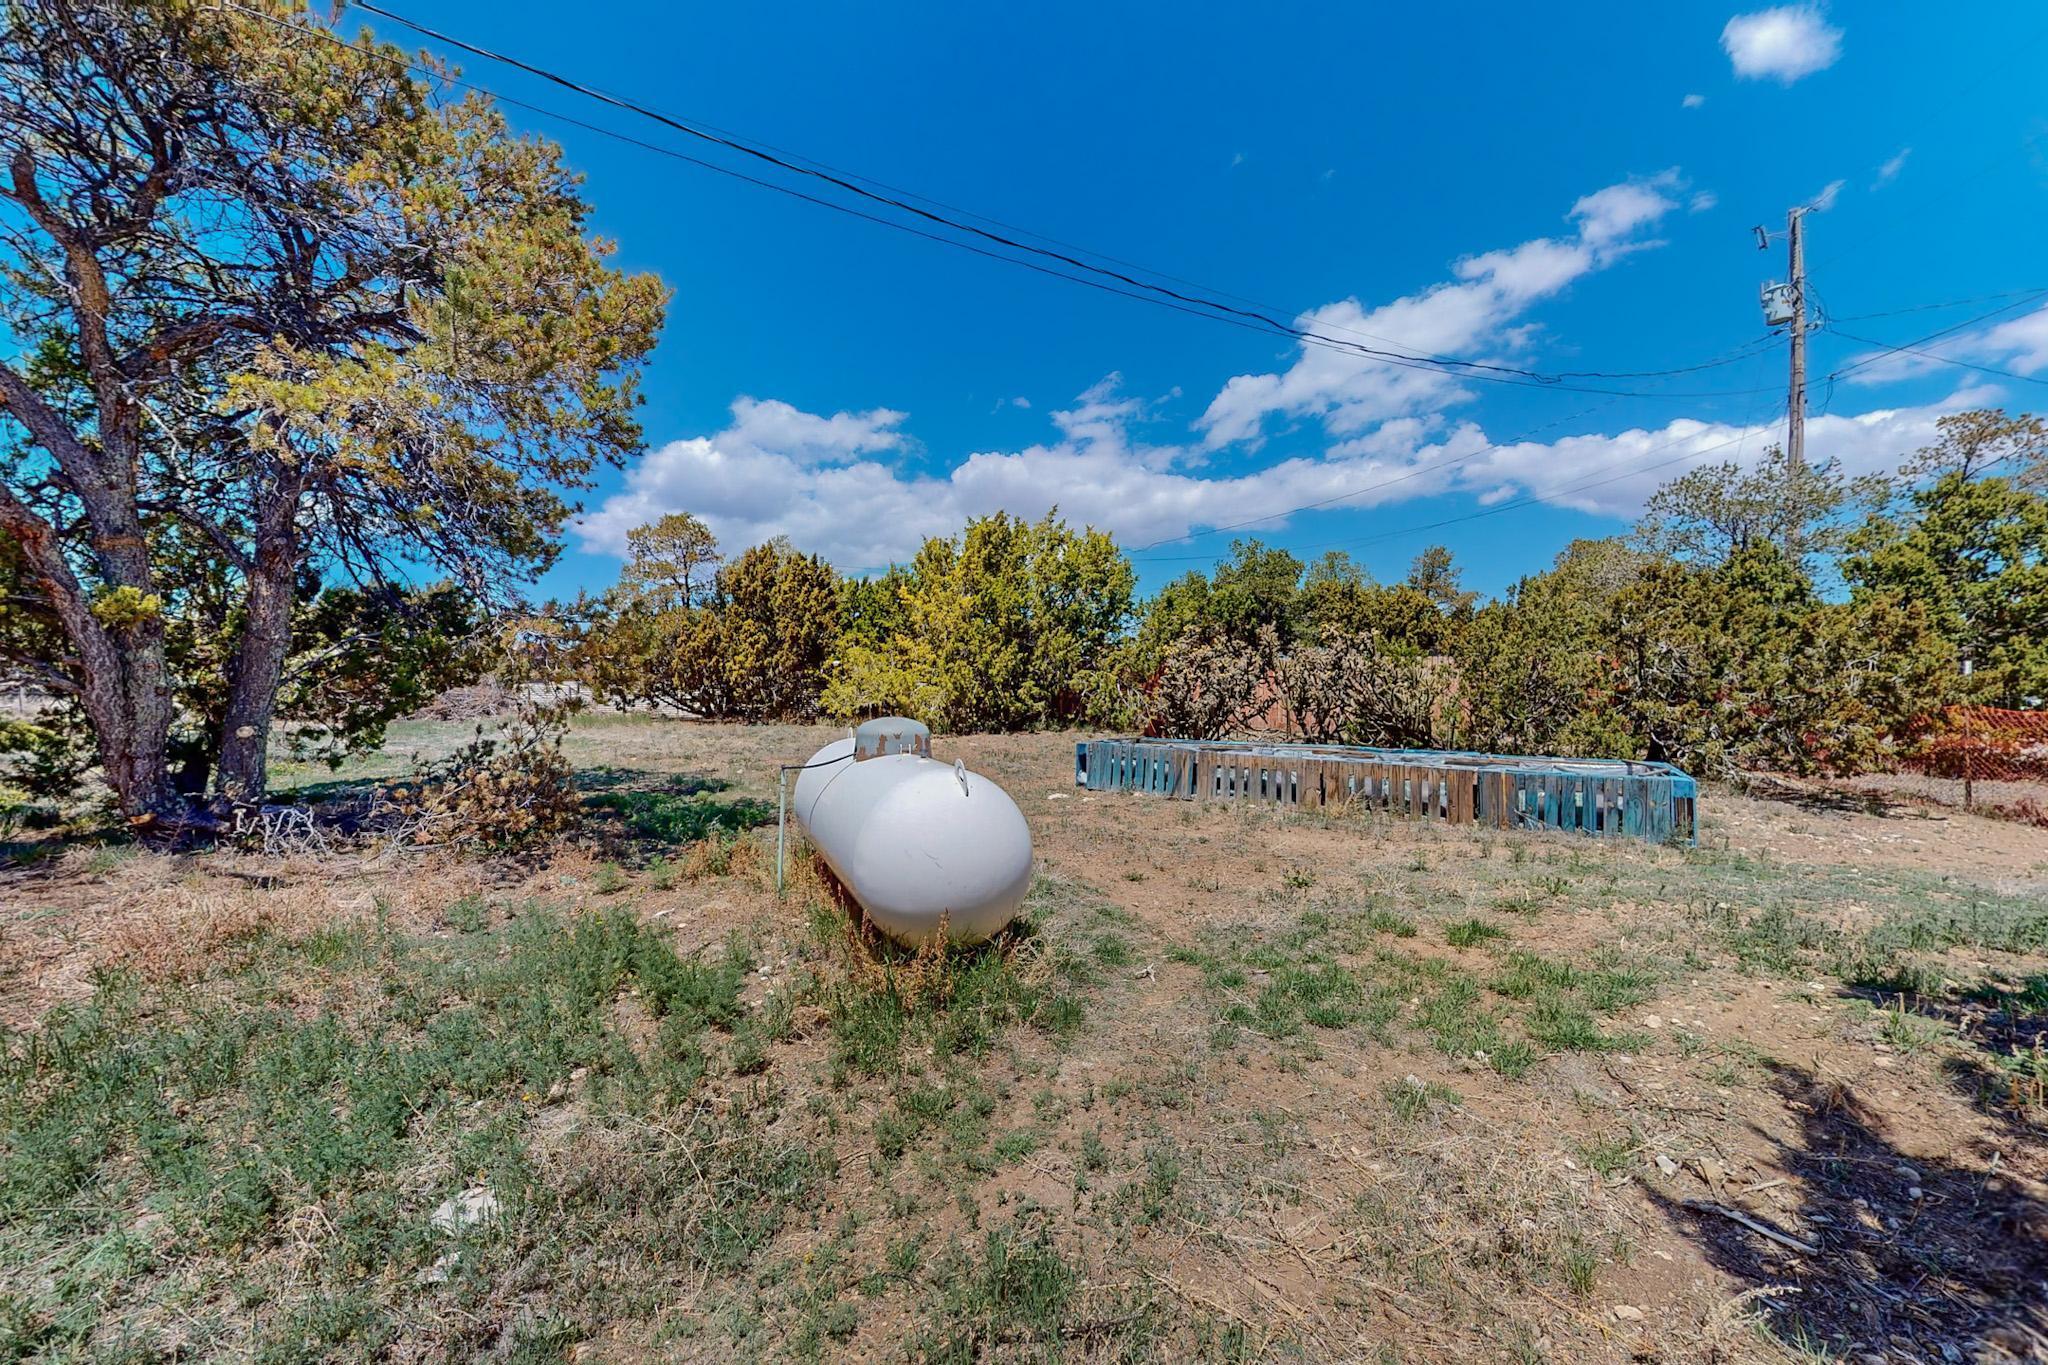 17 A E Willard Road, Edgewood, New Mexico 87015, 3 Bedrooms Bedrooms, ,2 BathroomsBathrooms,Residential,For Sale,17 A E Willard Road,1061275